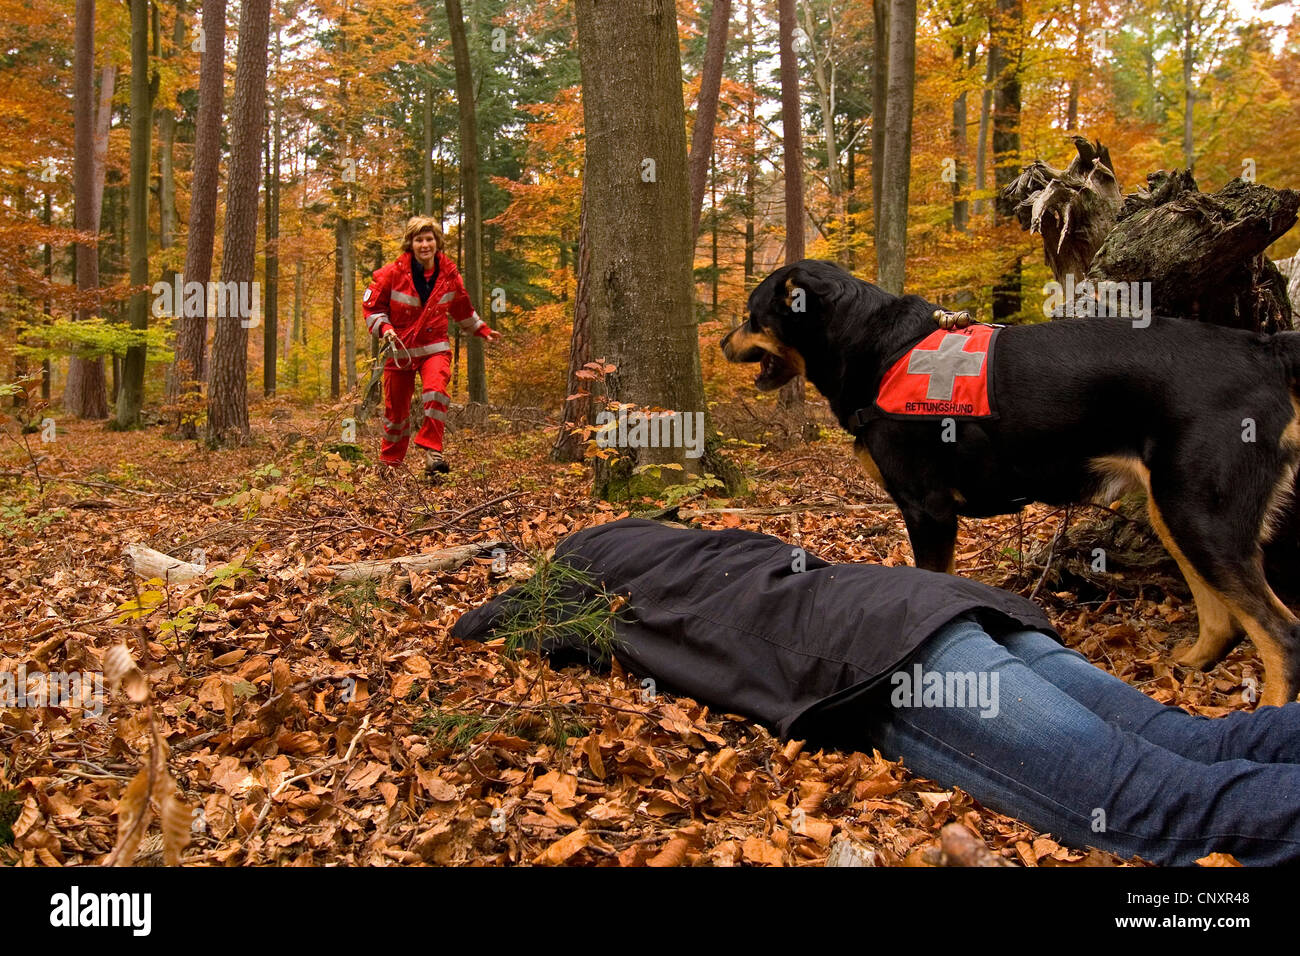 mixed breed dog (Canis lupus f. familiaris), search and rescue dog finding a person in autumn forest Stock Photo